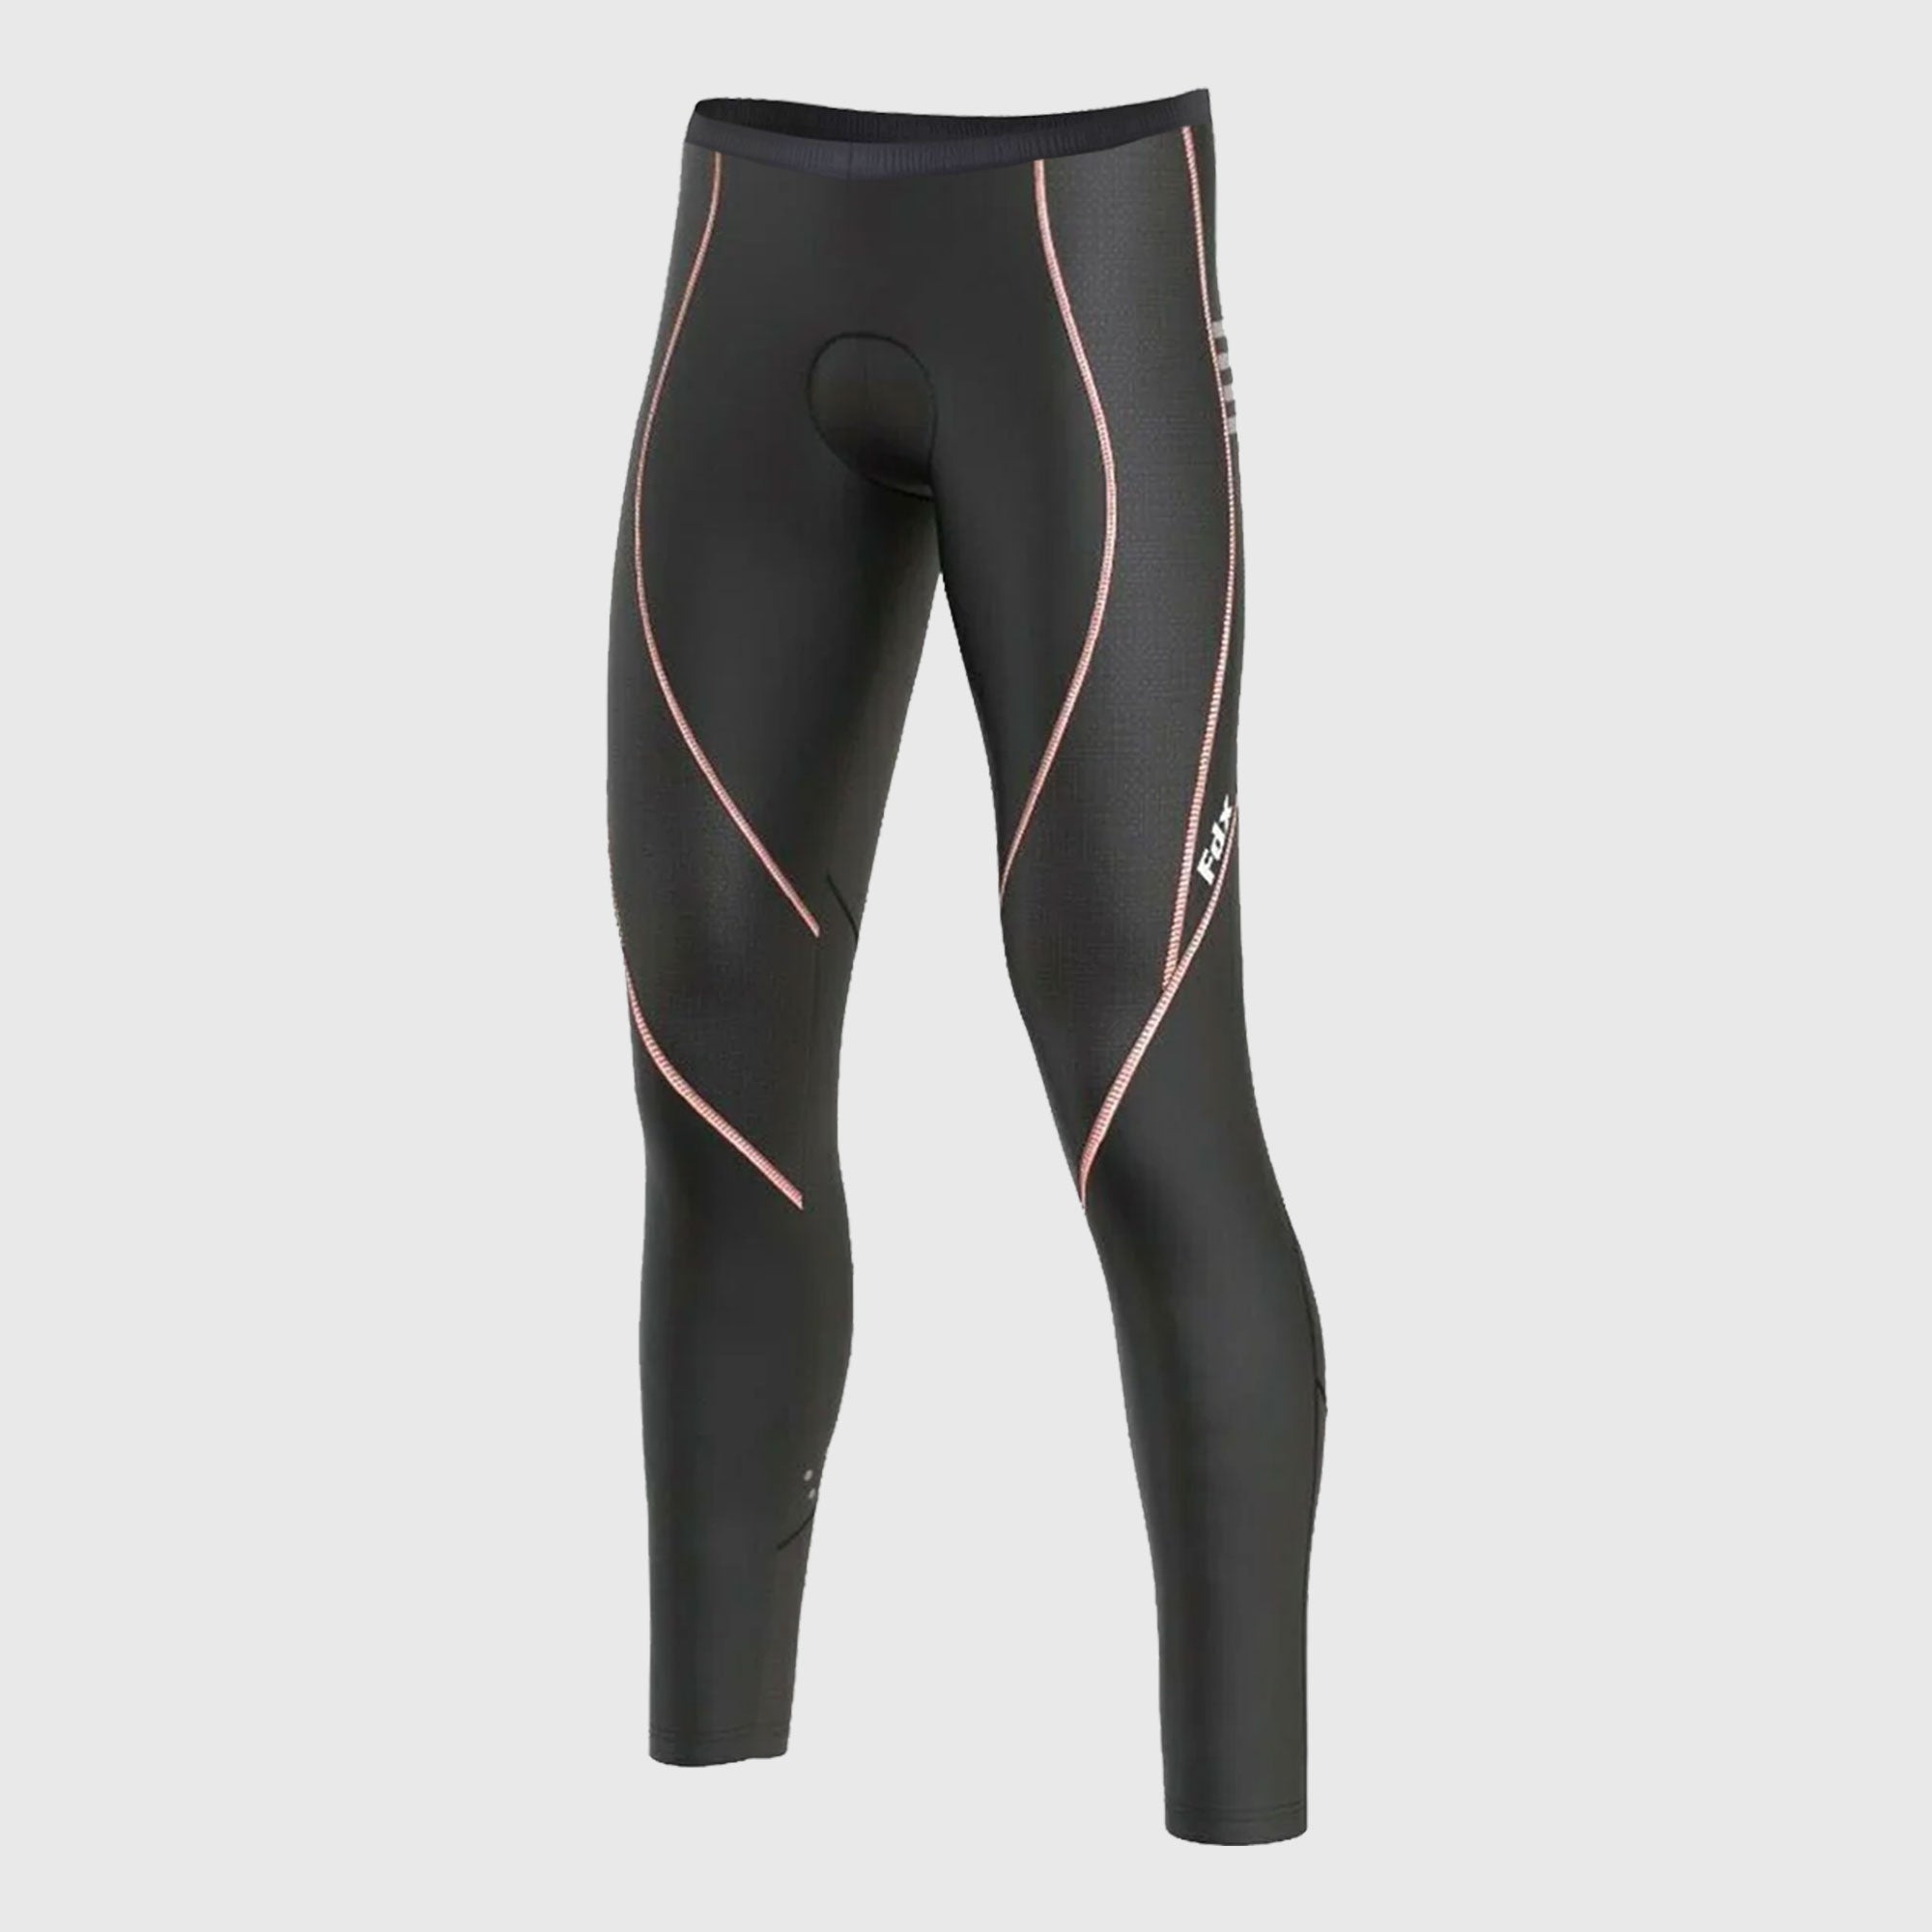 Athl Dpt Thermal leggings for men: for sale at 19.99€ on